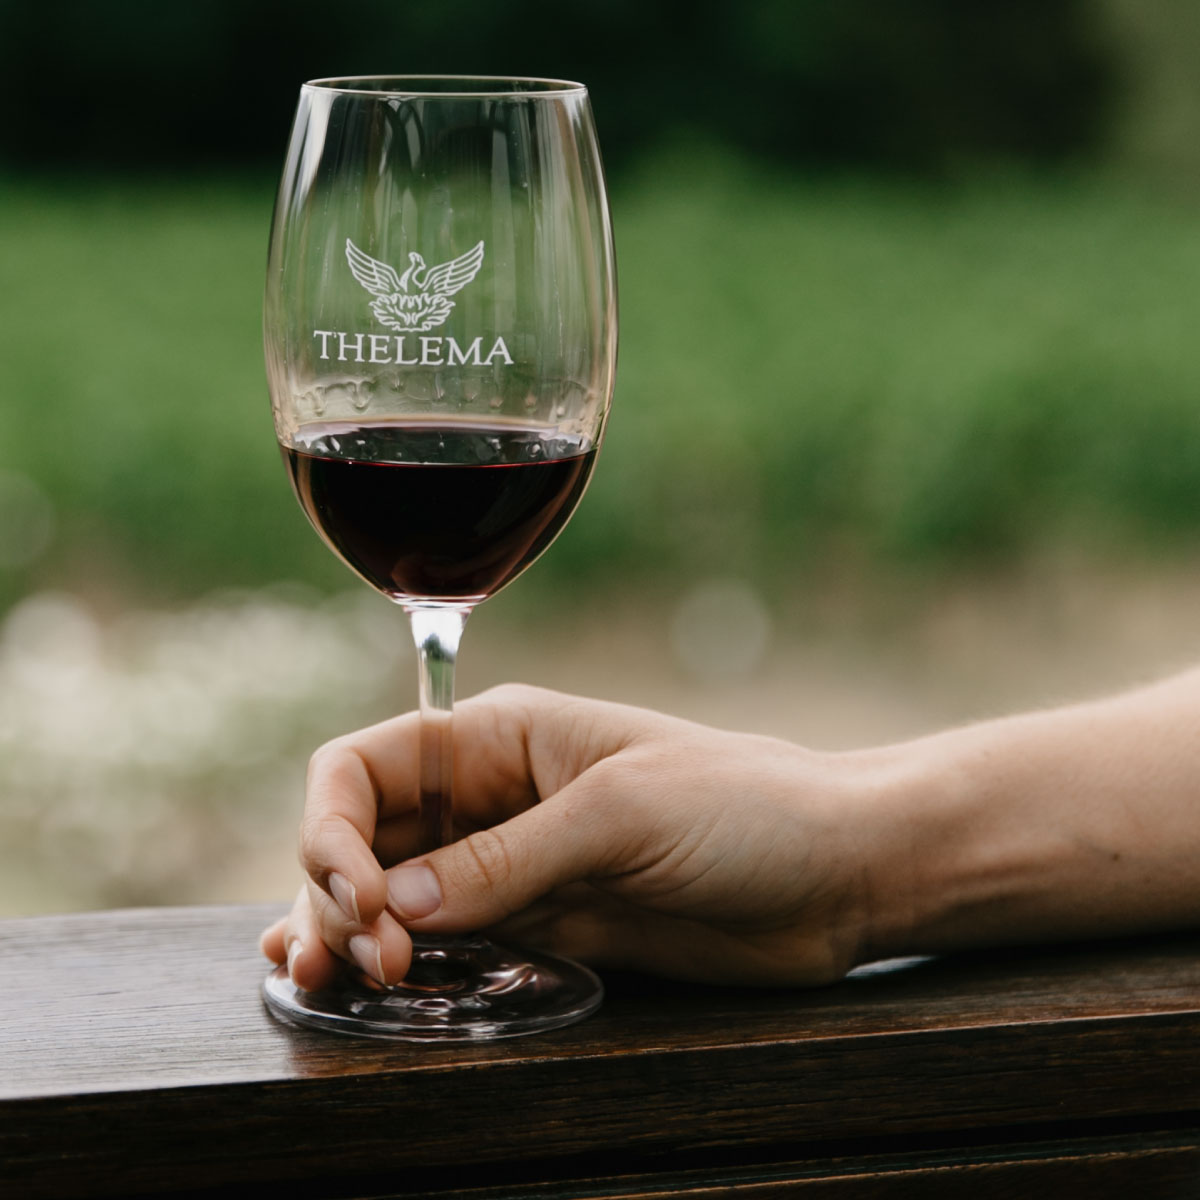 🍷🌀 Sip and swirl your way through Stellenbosch, South Africa! Sample a line up of Thelema Mountain stunners on Wed, May 29th. Call us to attend or sign up at bit.ly/3Wgm3q8

#SouthAfricanVineyards #WineTasting #StellenboschWines #WinerySpotlight @ThelemaWines